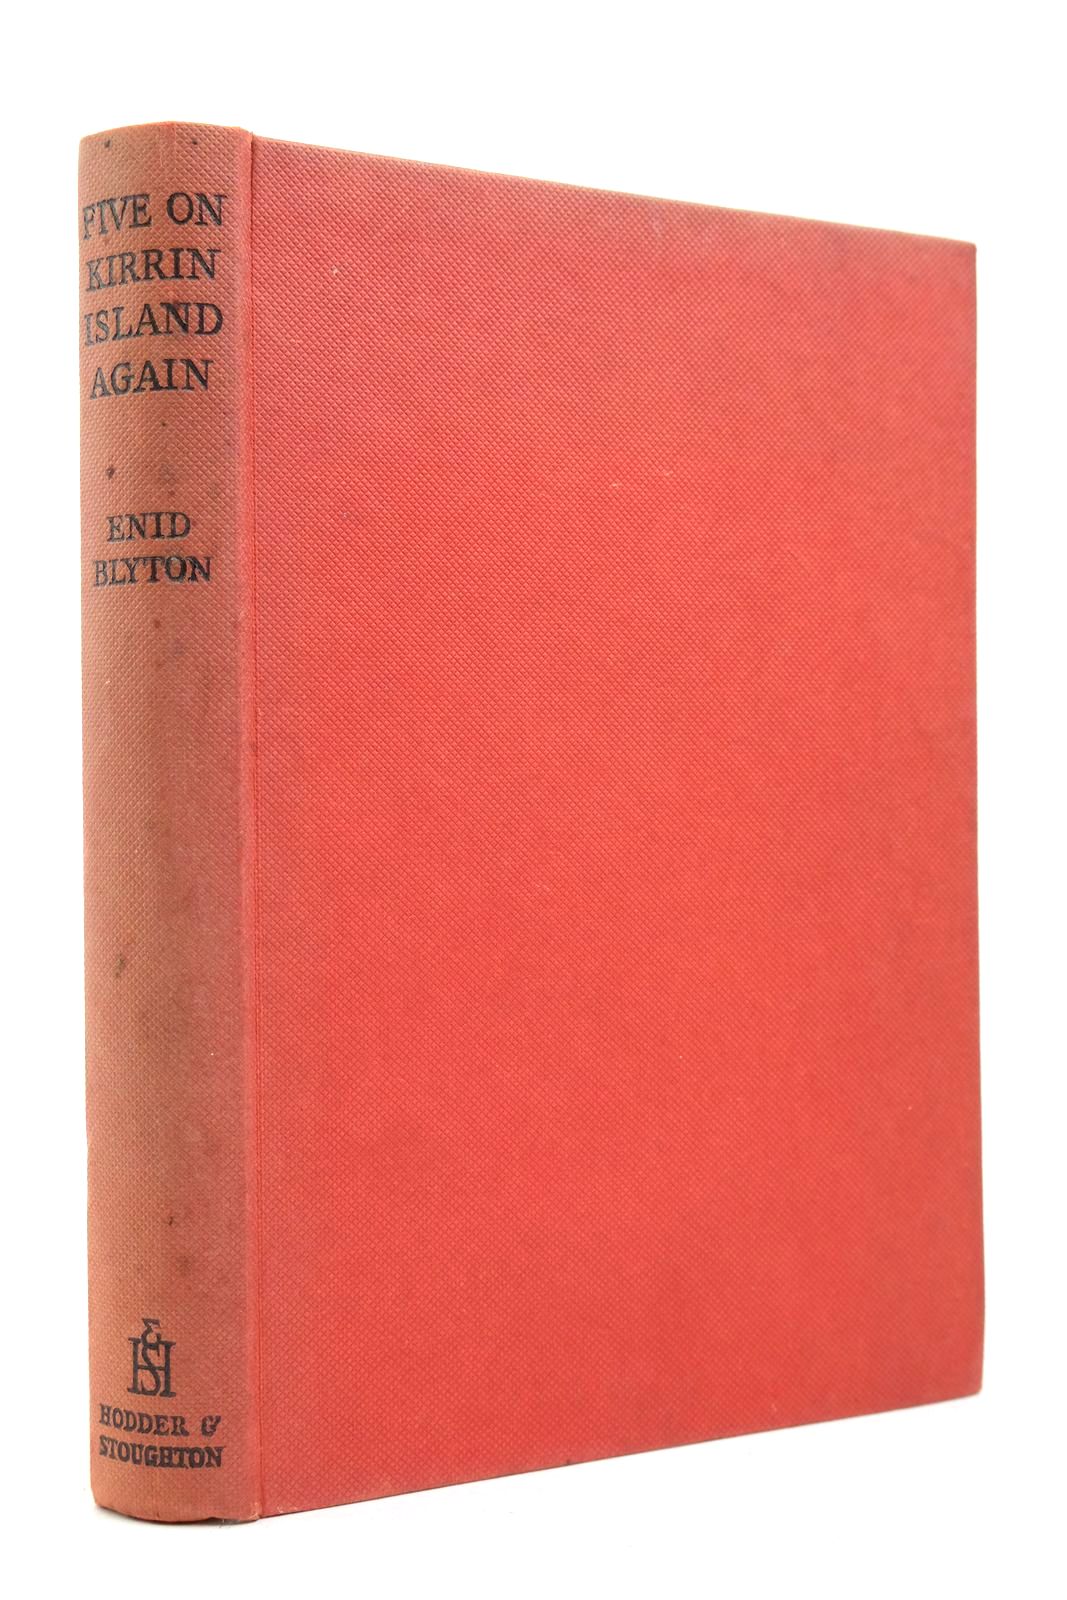 Photo of FIVE ON KIRRIN ISLAND AGAIN written by Blyton, Enid illustrated by Soper, Eileen published by Hodder &amp; Stoughton (STOCK CODE: 2140490)  for sale by Stella & Rose's Books